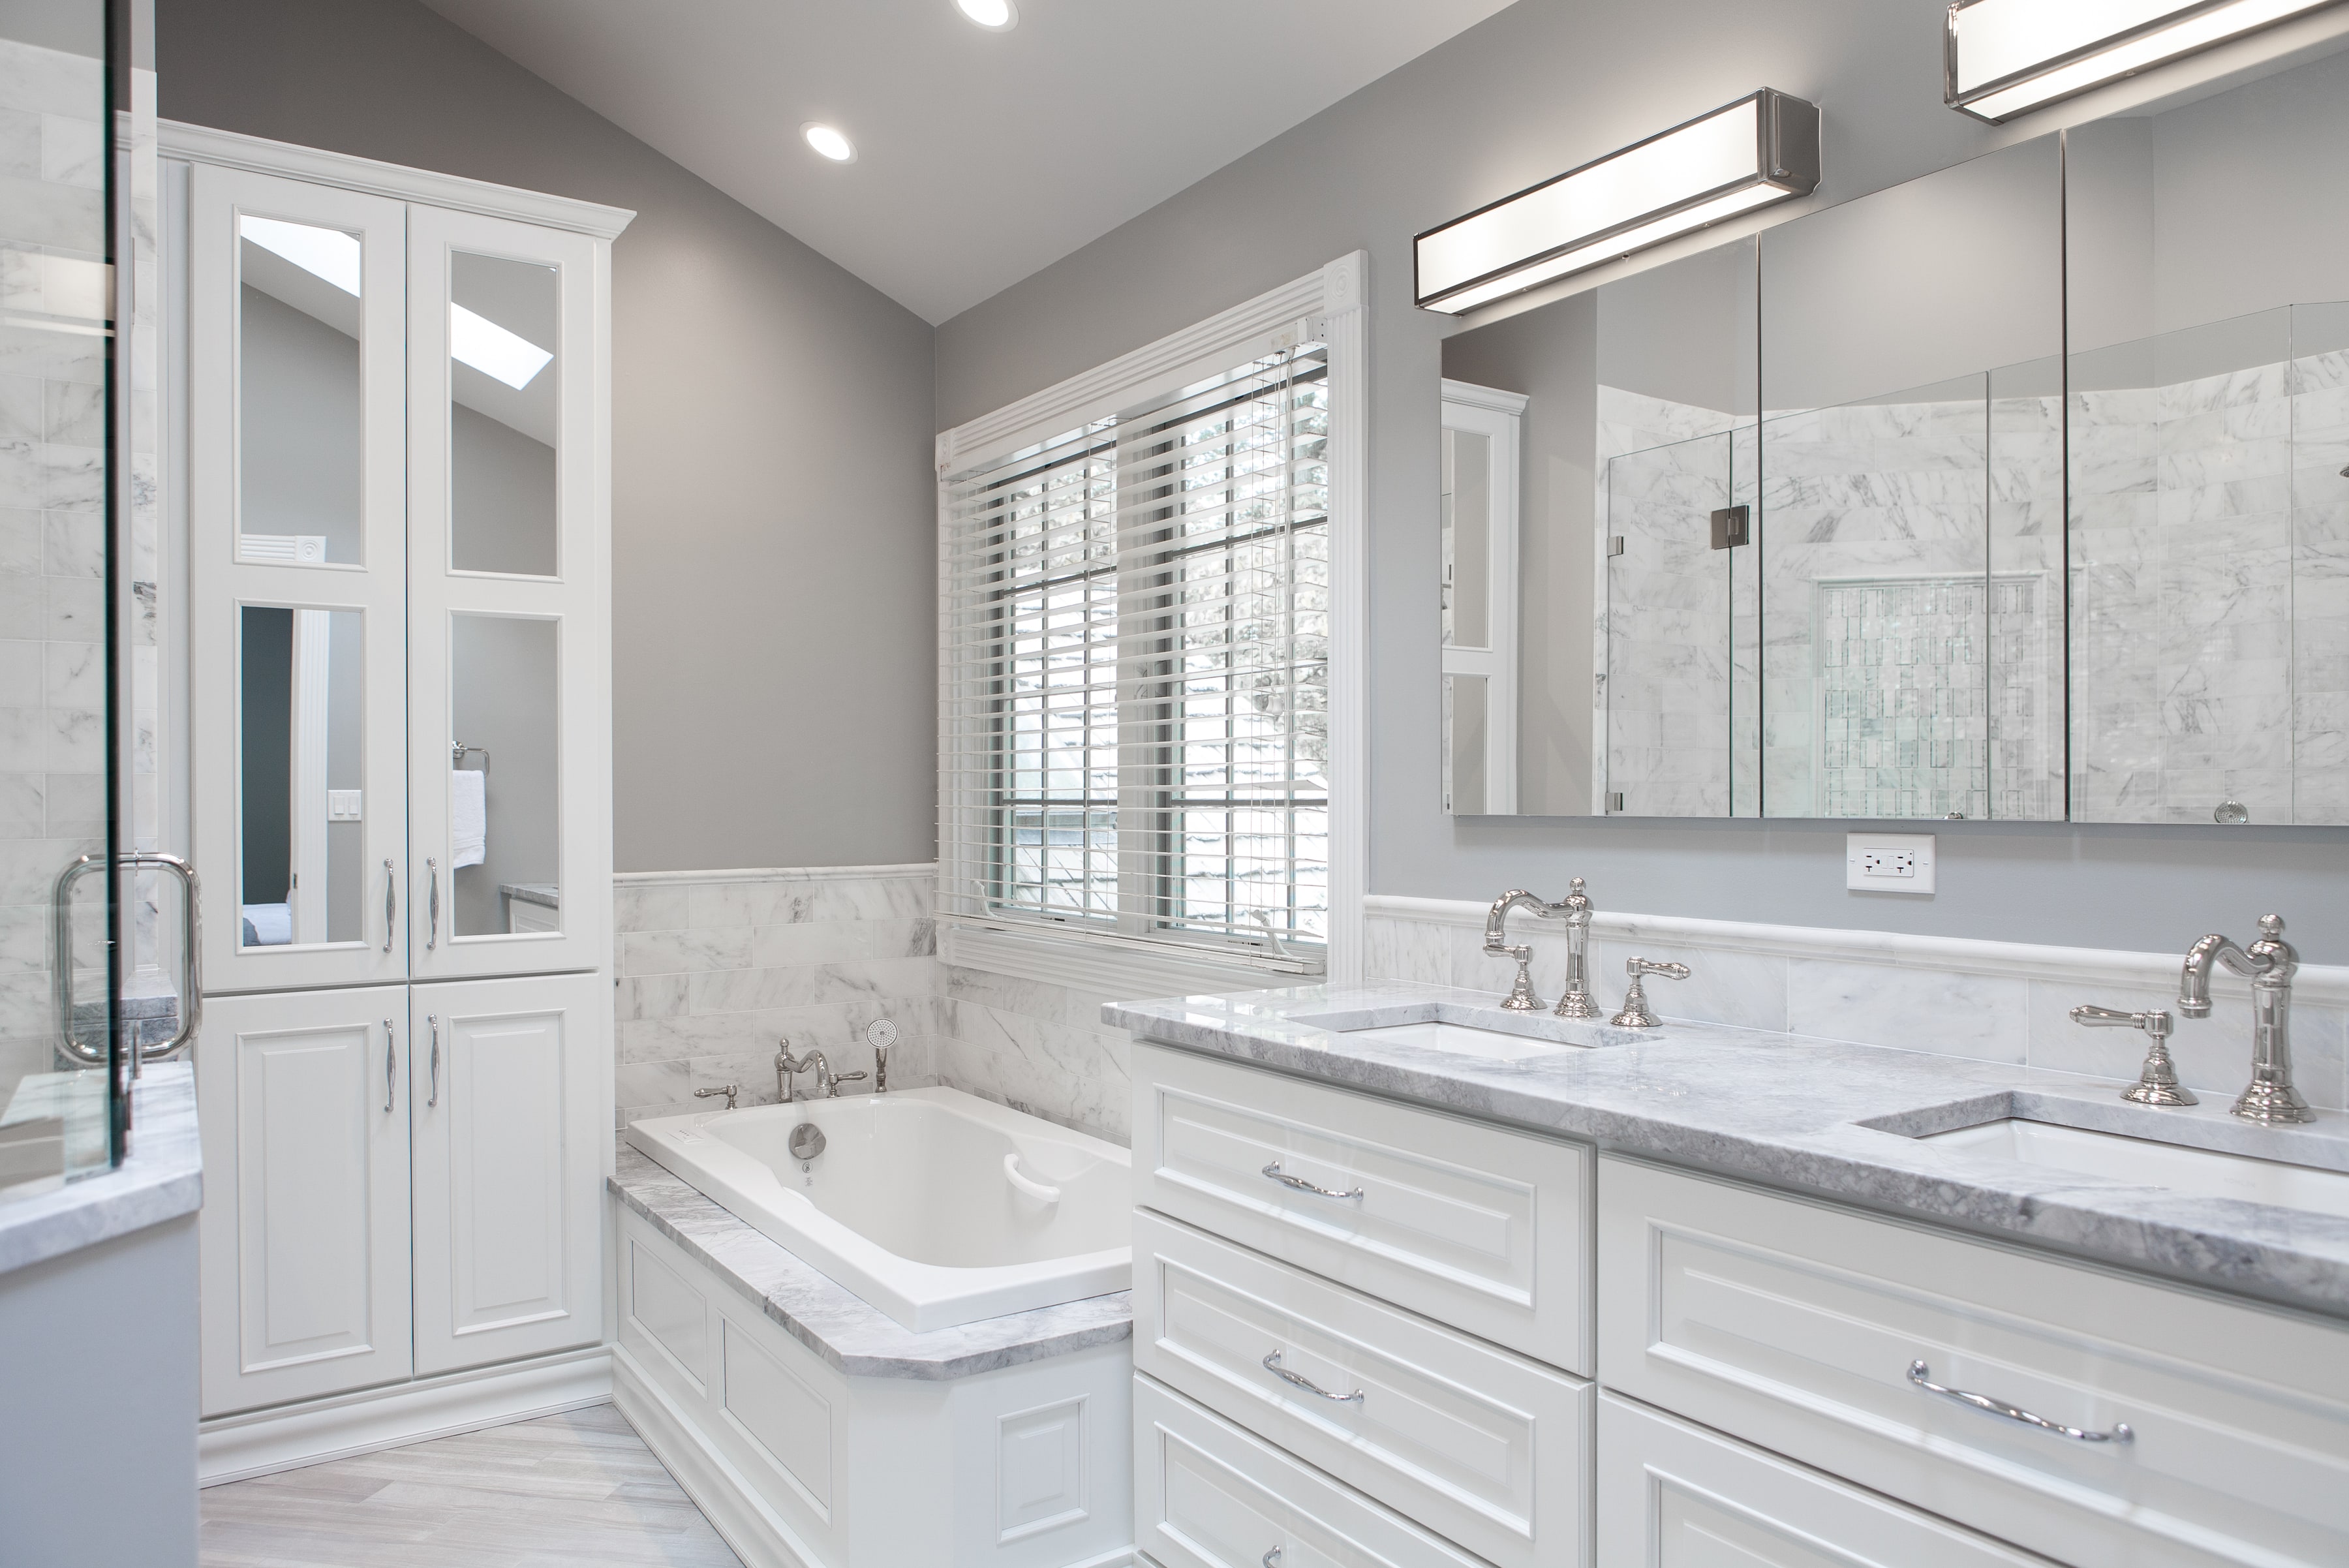 How Much For A Master Bathroom Remodel Bathroom Mirrors